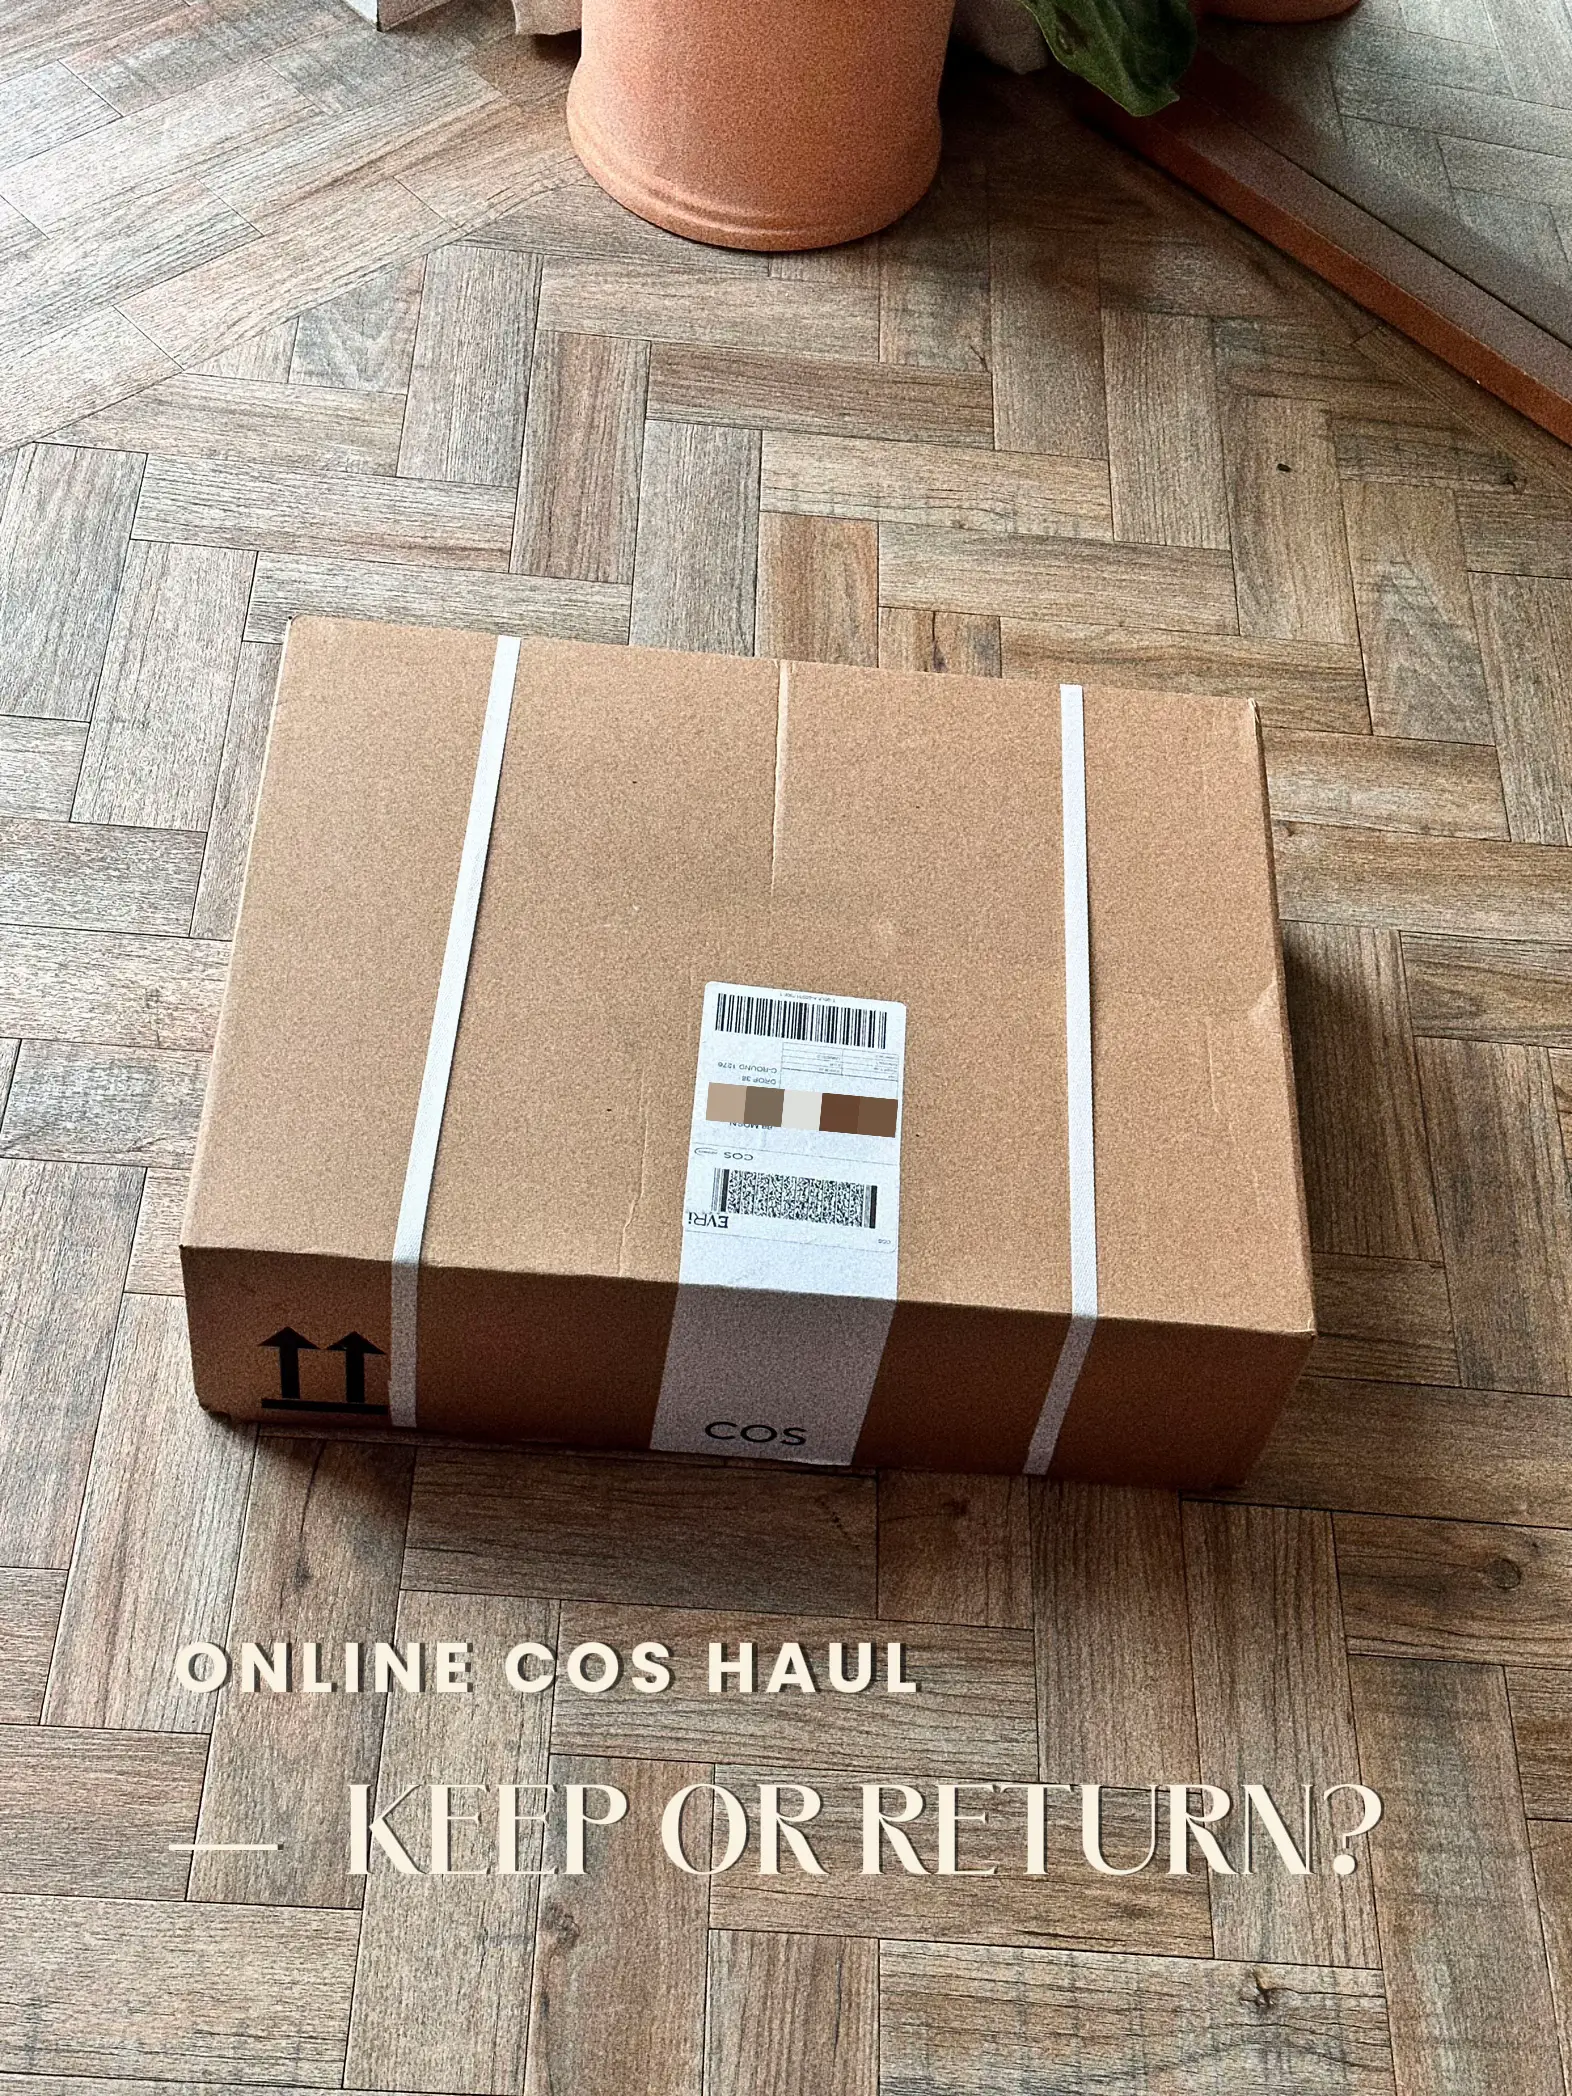 WHAT I ORDERED ONLINE FROM COS. KEEP OR RETURN?